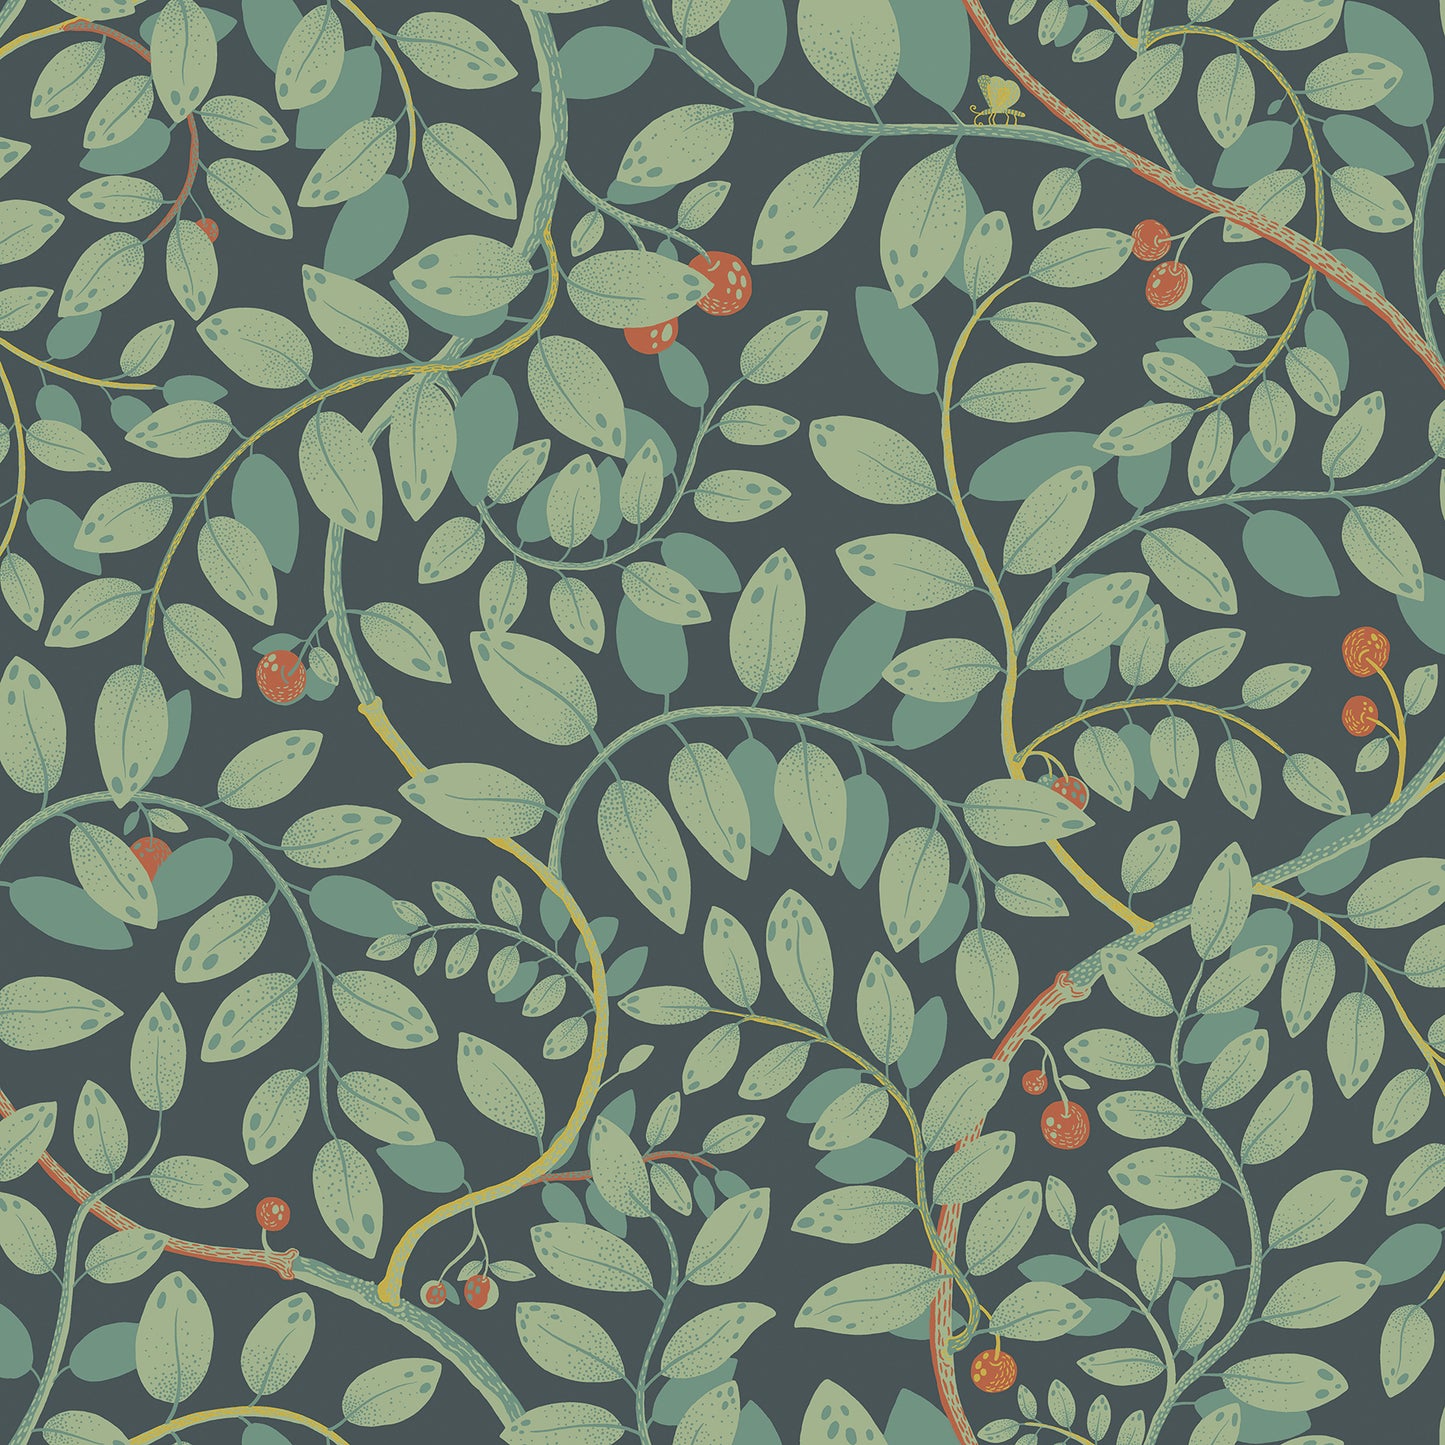 Purchase 2932-65105 Lina Kirke Turquoise Leafy Vines Blue A-Street Prints Wallpaper